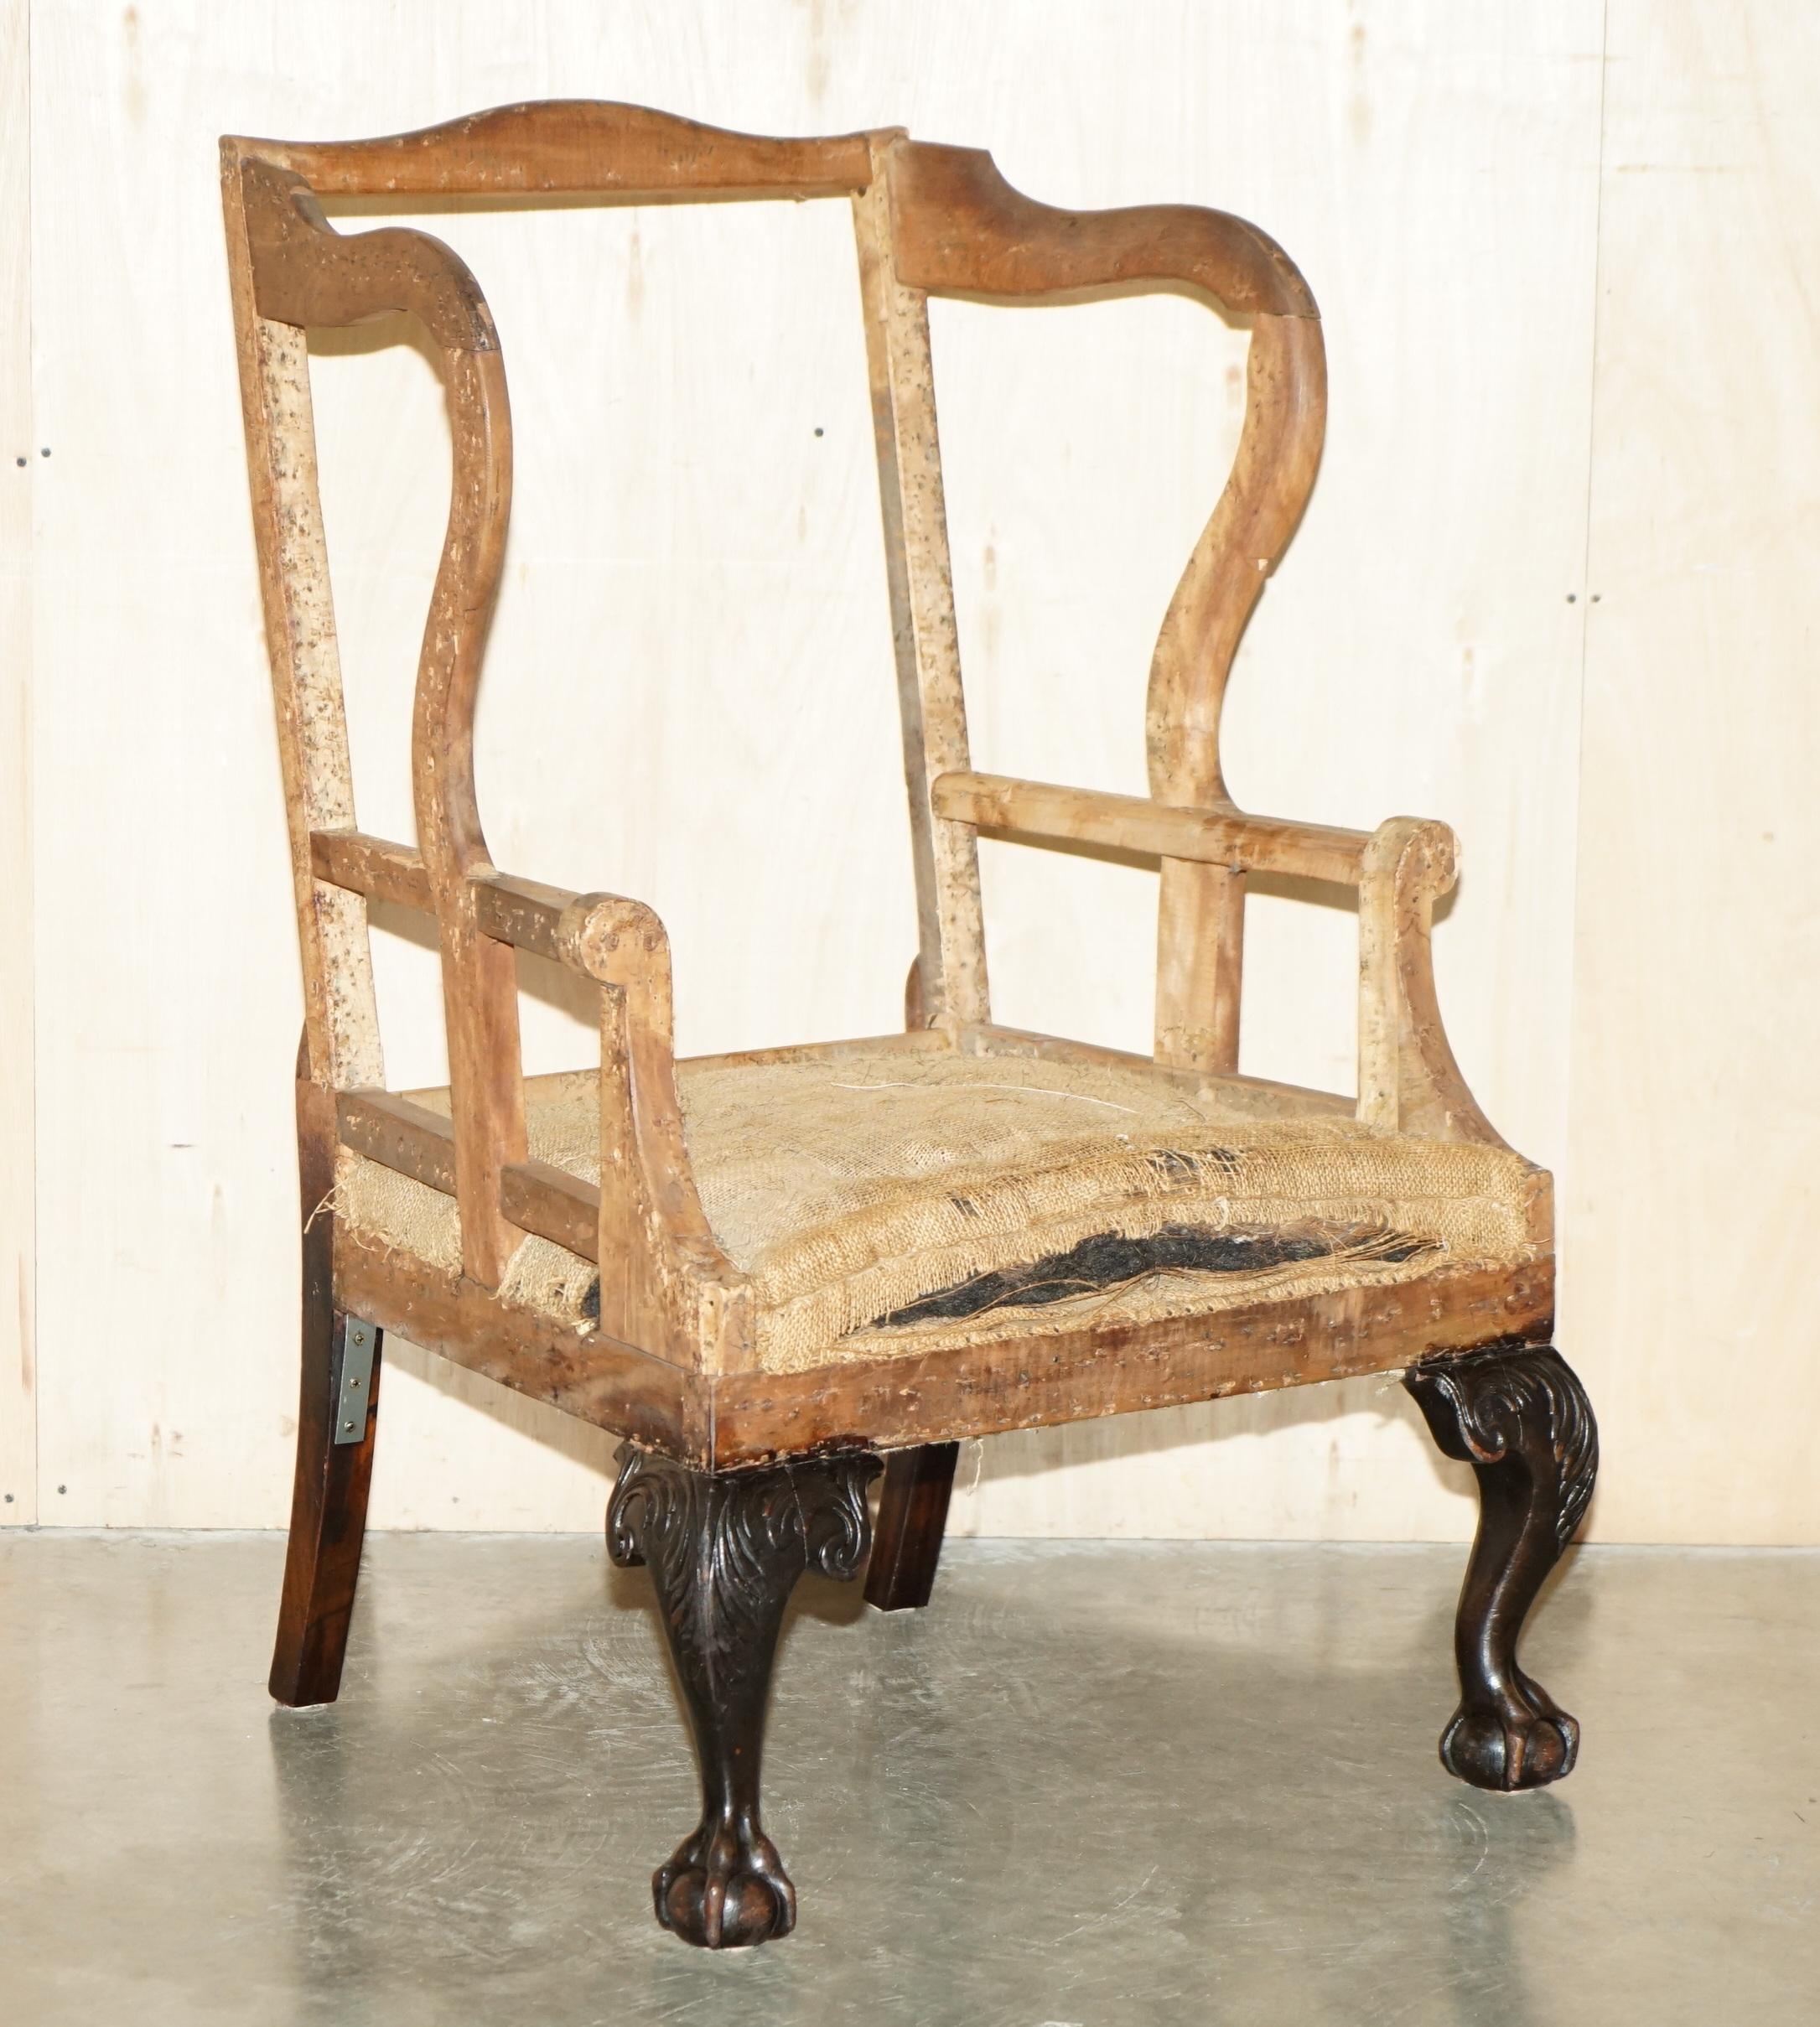 Royal House Antiques

Royal House Antiques is delighted to offer for sale this stunning, stripped back circa 1780-1800 Georgian Claw & Ball carved wingback armchair frame

Please note the delivery fee listed is just a guide, it covers within the M25